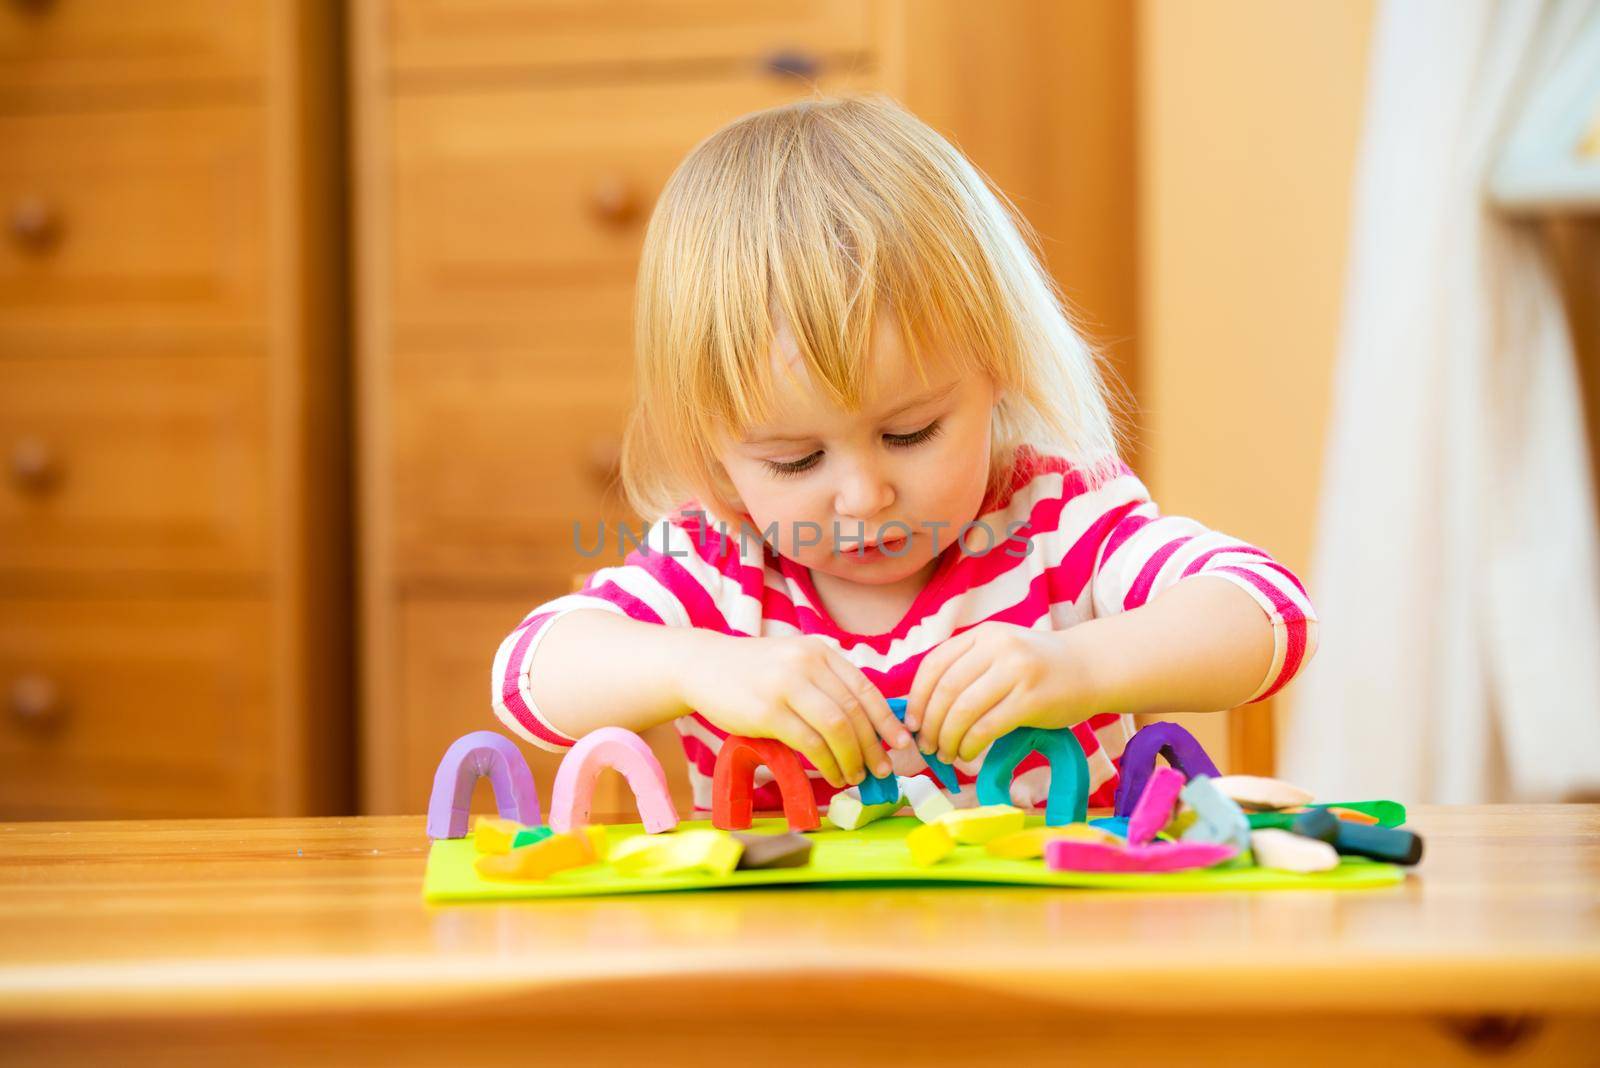 Smiling girl playing with plasticine at home